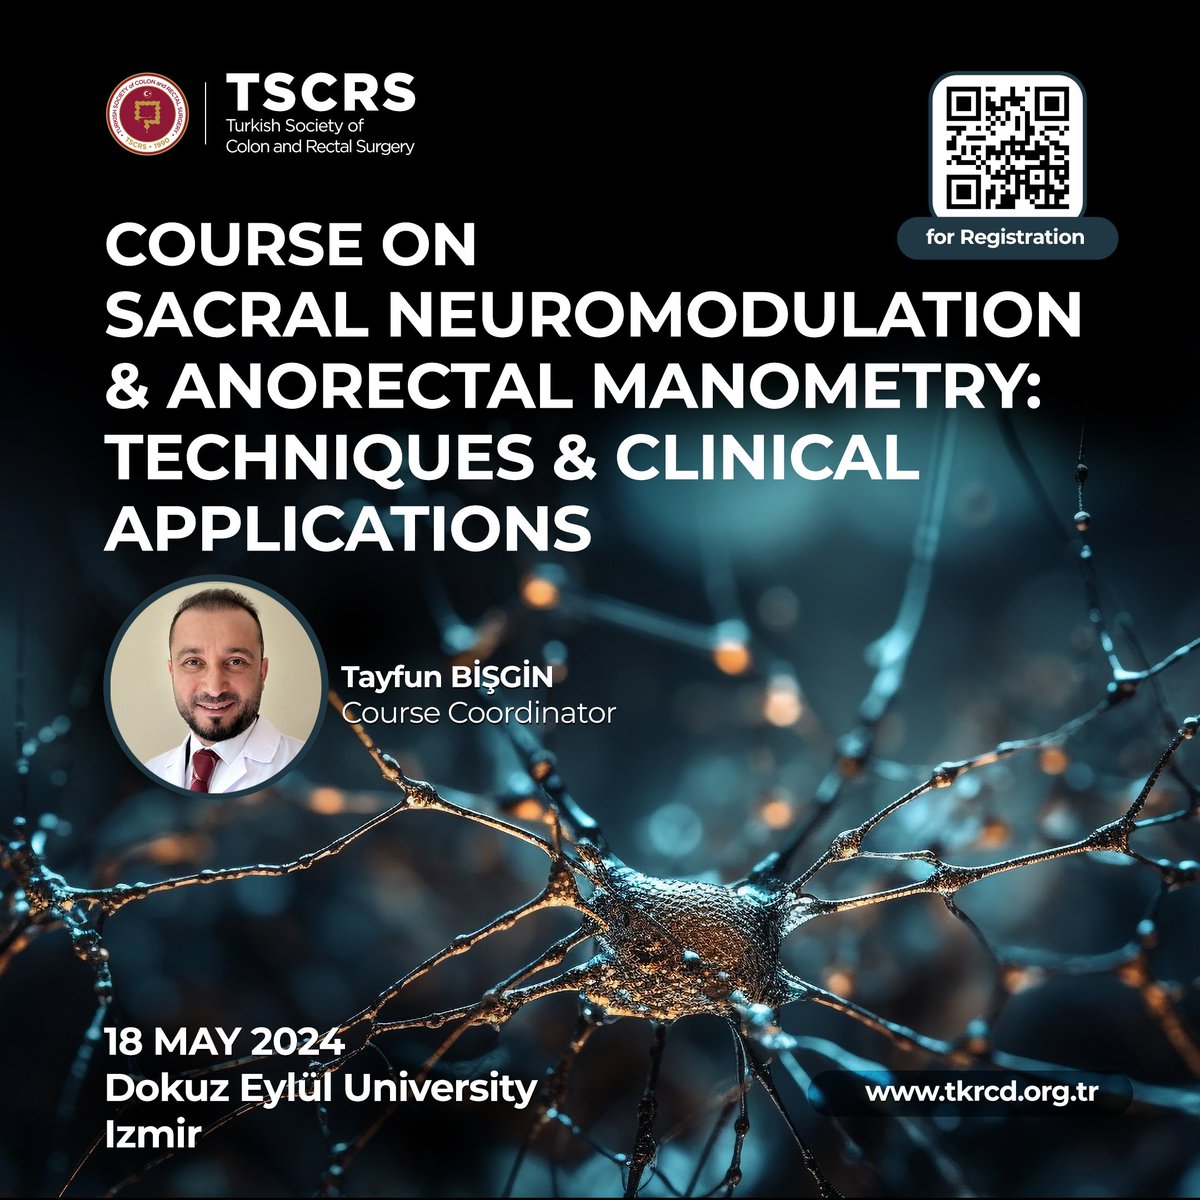 📢Last 2 days for Sacral Neuromodulation and Anal Manometry Course! ✅You are invited to this current course that will be discussed with experts on the subject! 🎰 Saturday, 18 May 2024, 09:00-16:00 📍Dokuz Eylül University, İZMİR 🛜 Hybrid education #SoMe4Surgery